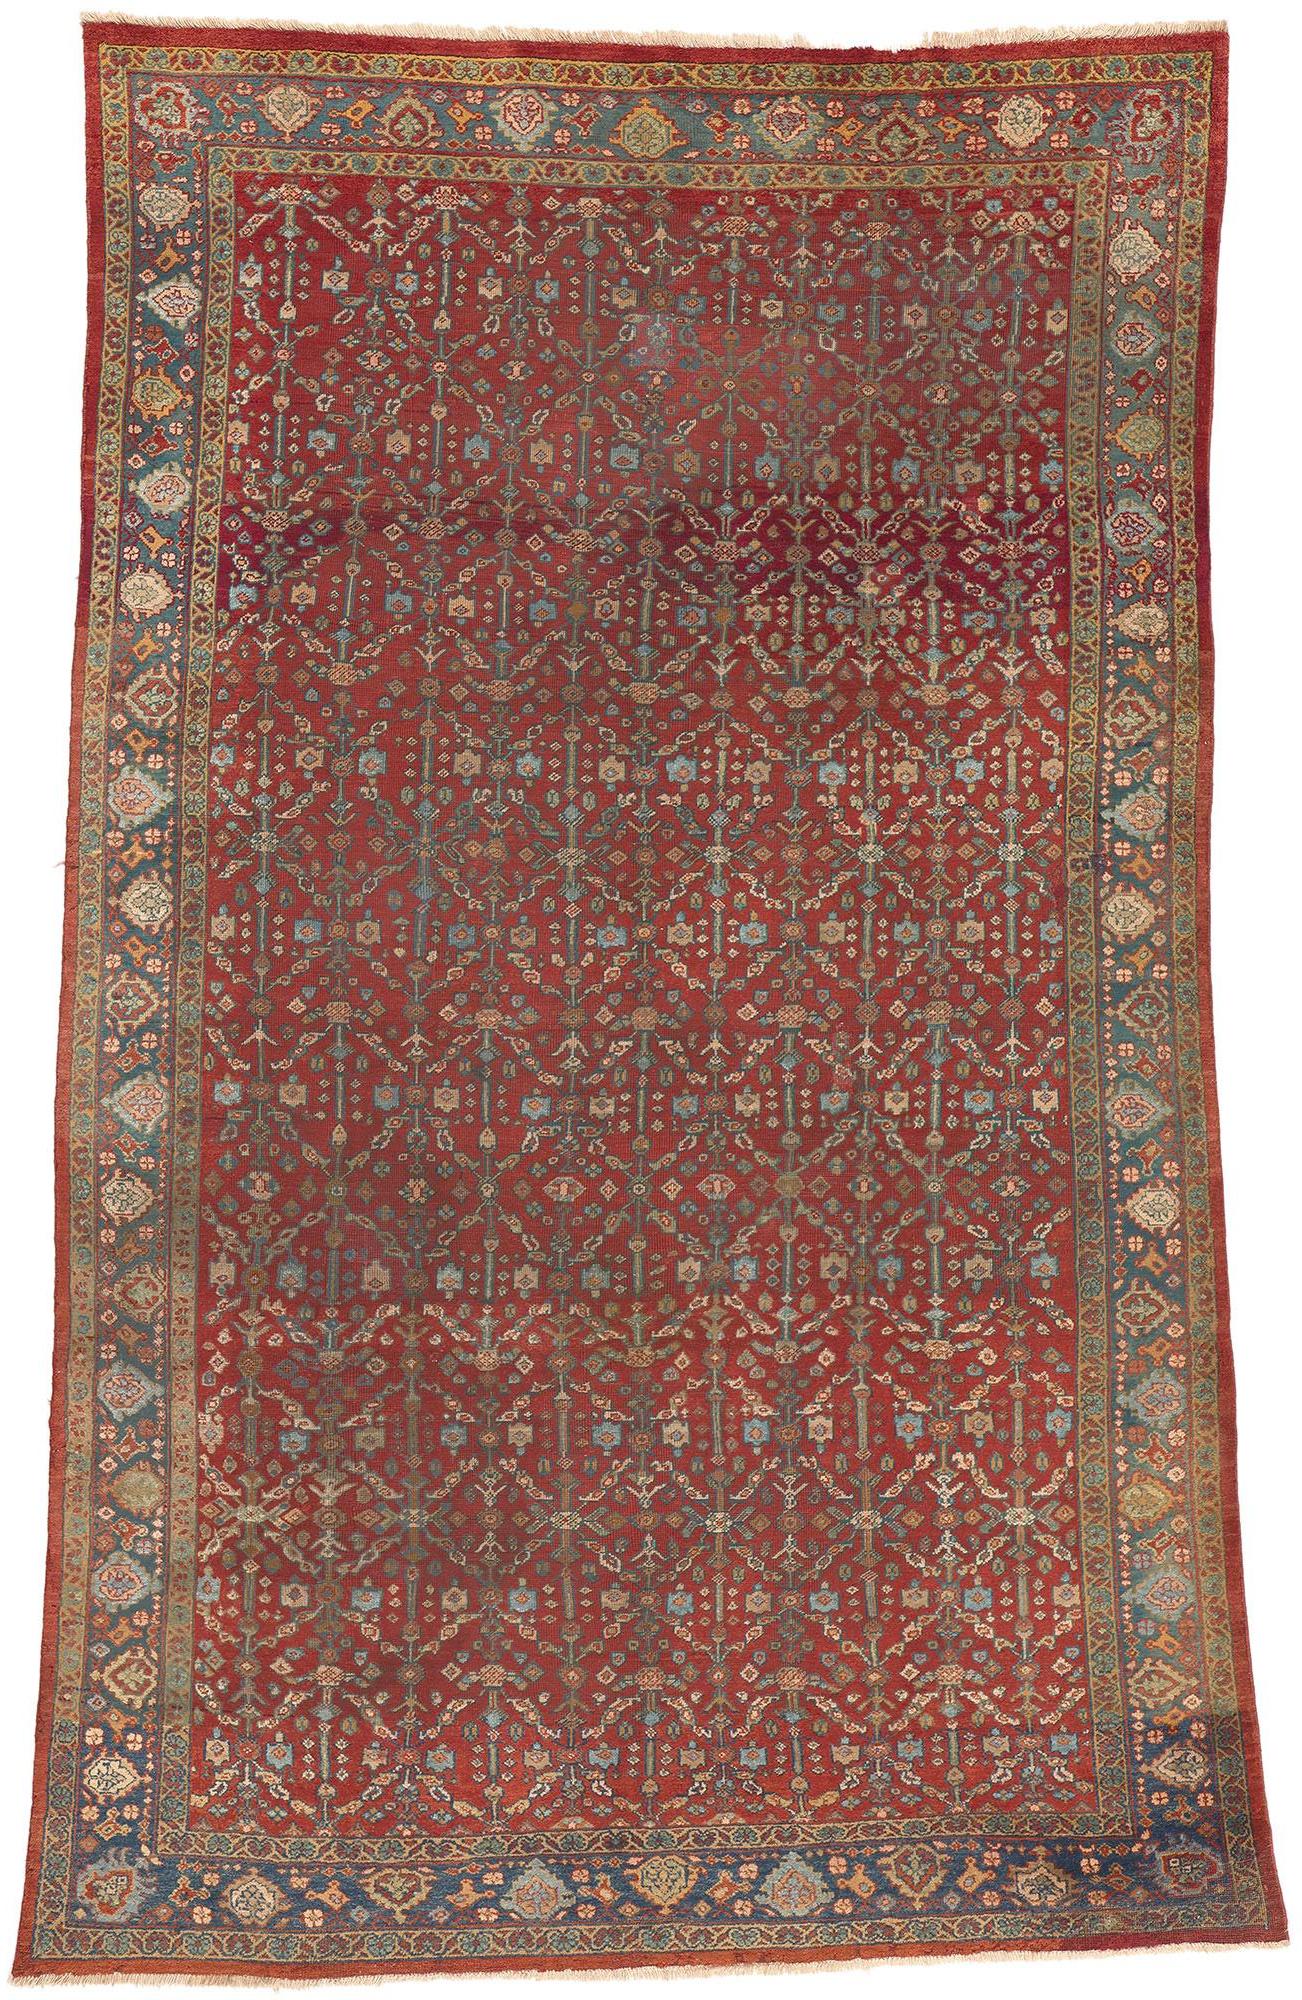 Antique-Worn Persian Mahal Rug, Relaxed Refinement Meets Rustic Sensibility For Sale